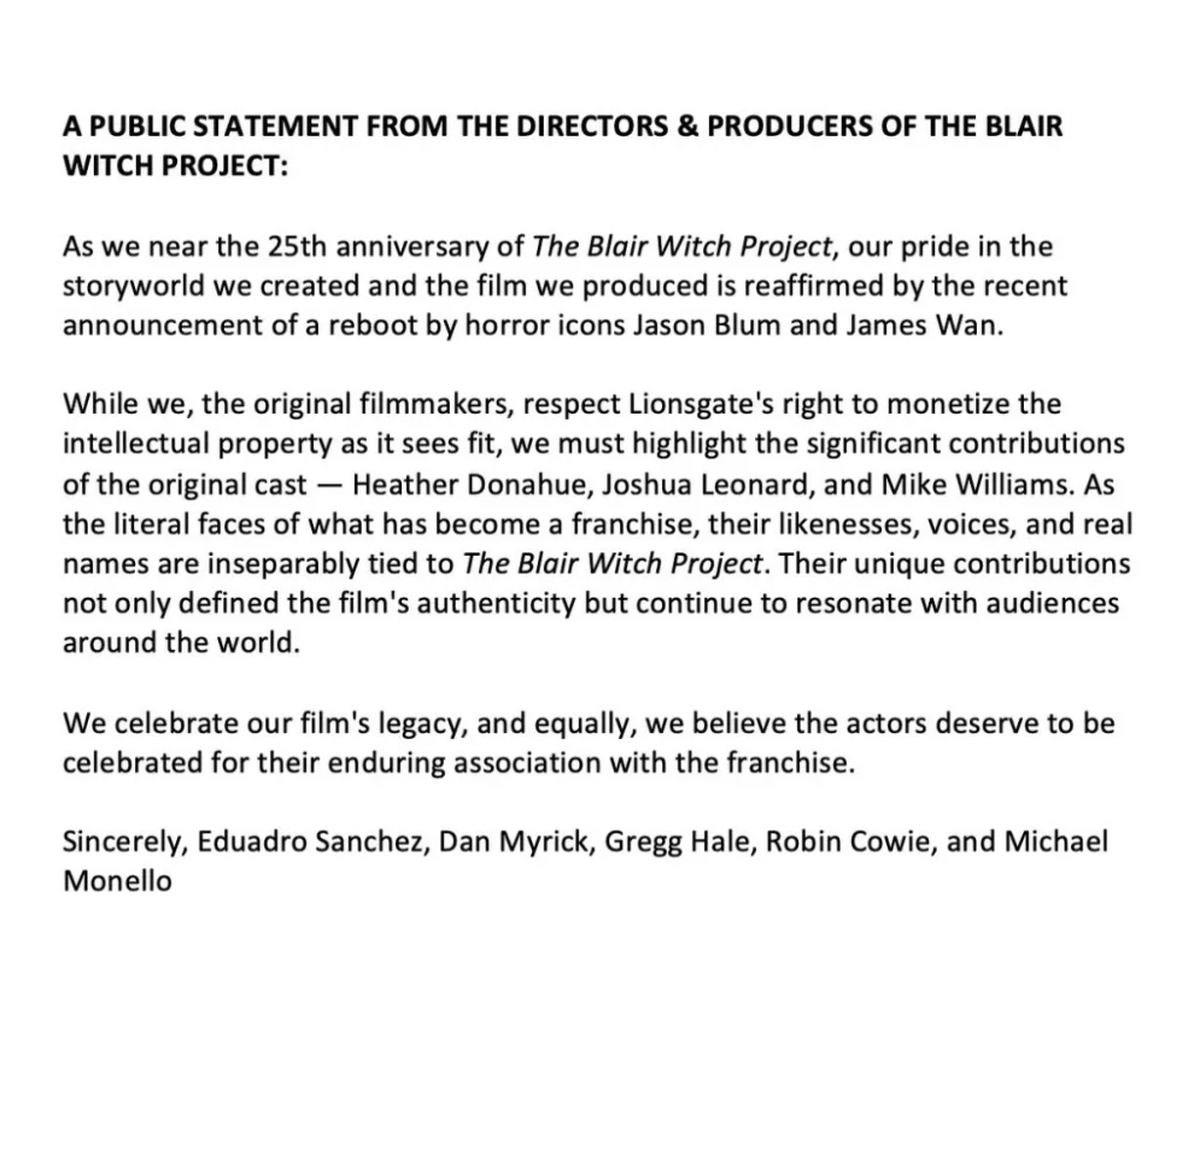 Statement from ‘The Blair Witch’ project directors and producers